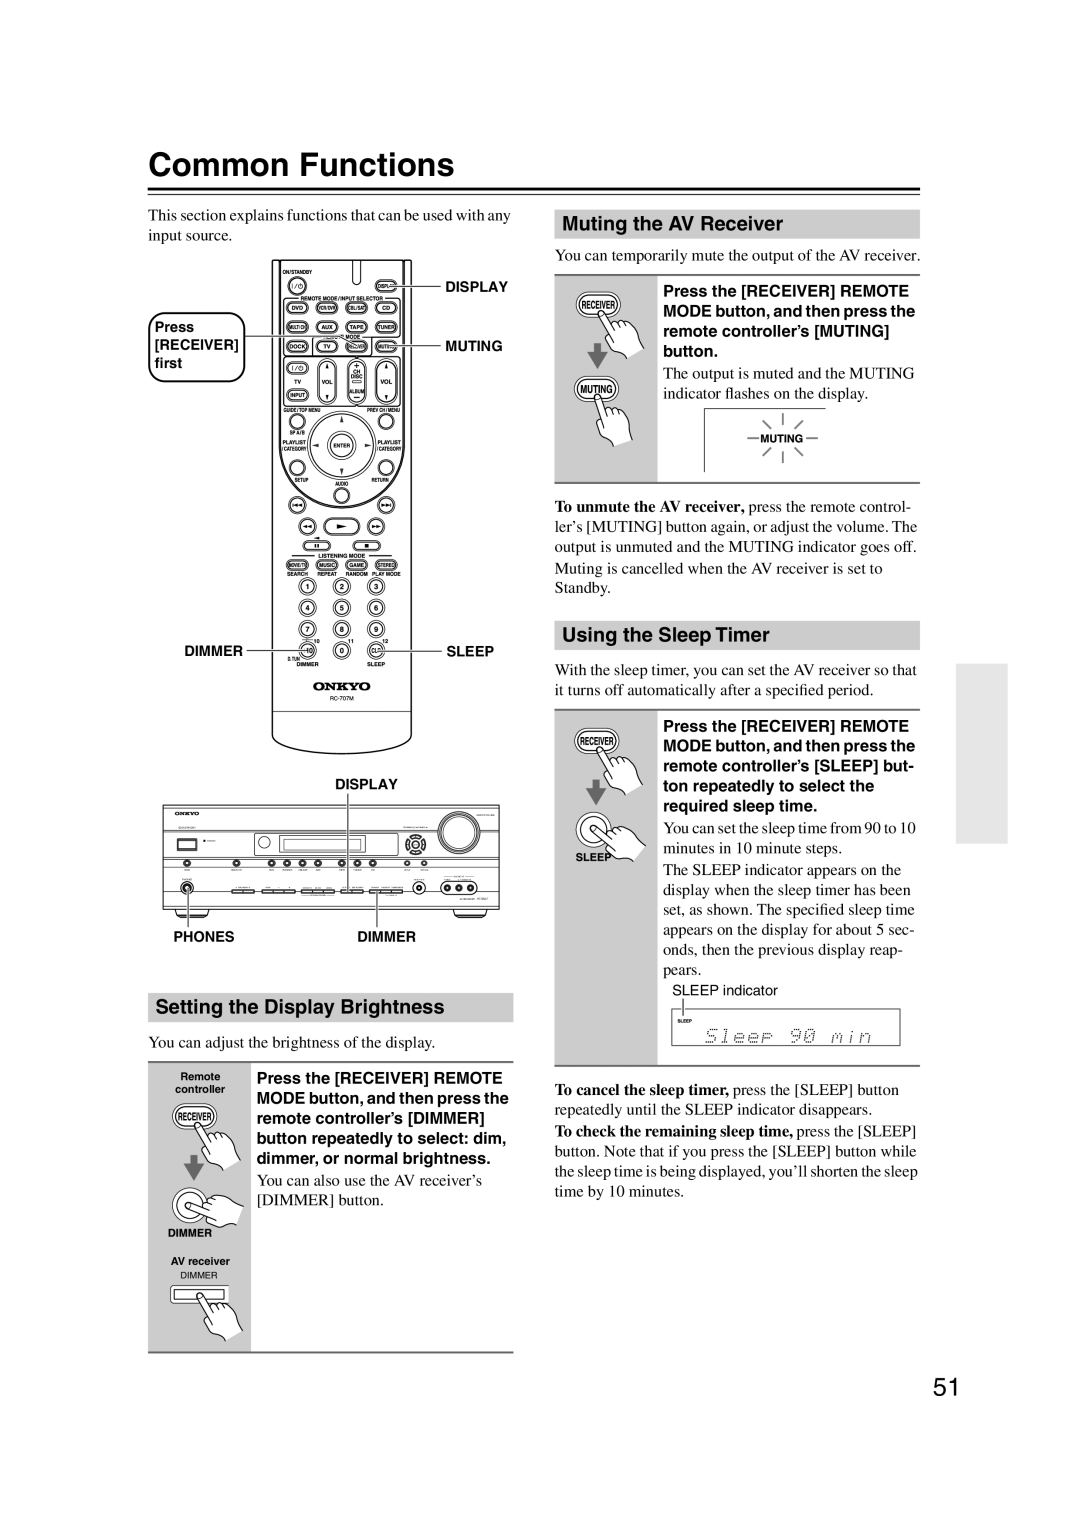 Onkyo HT-S6100 Common Functions, Setting the Display Brightness, Muting the AV Receiver, Using the Sleep Timer, Remote 